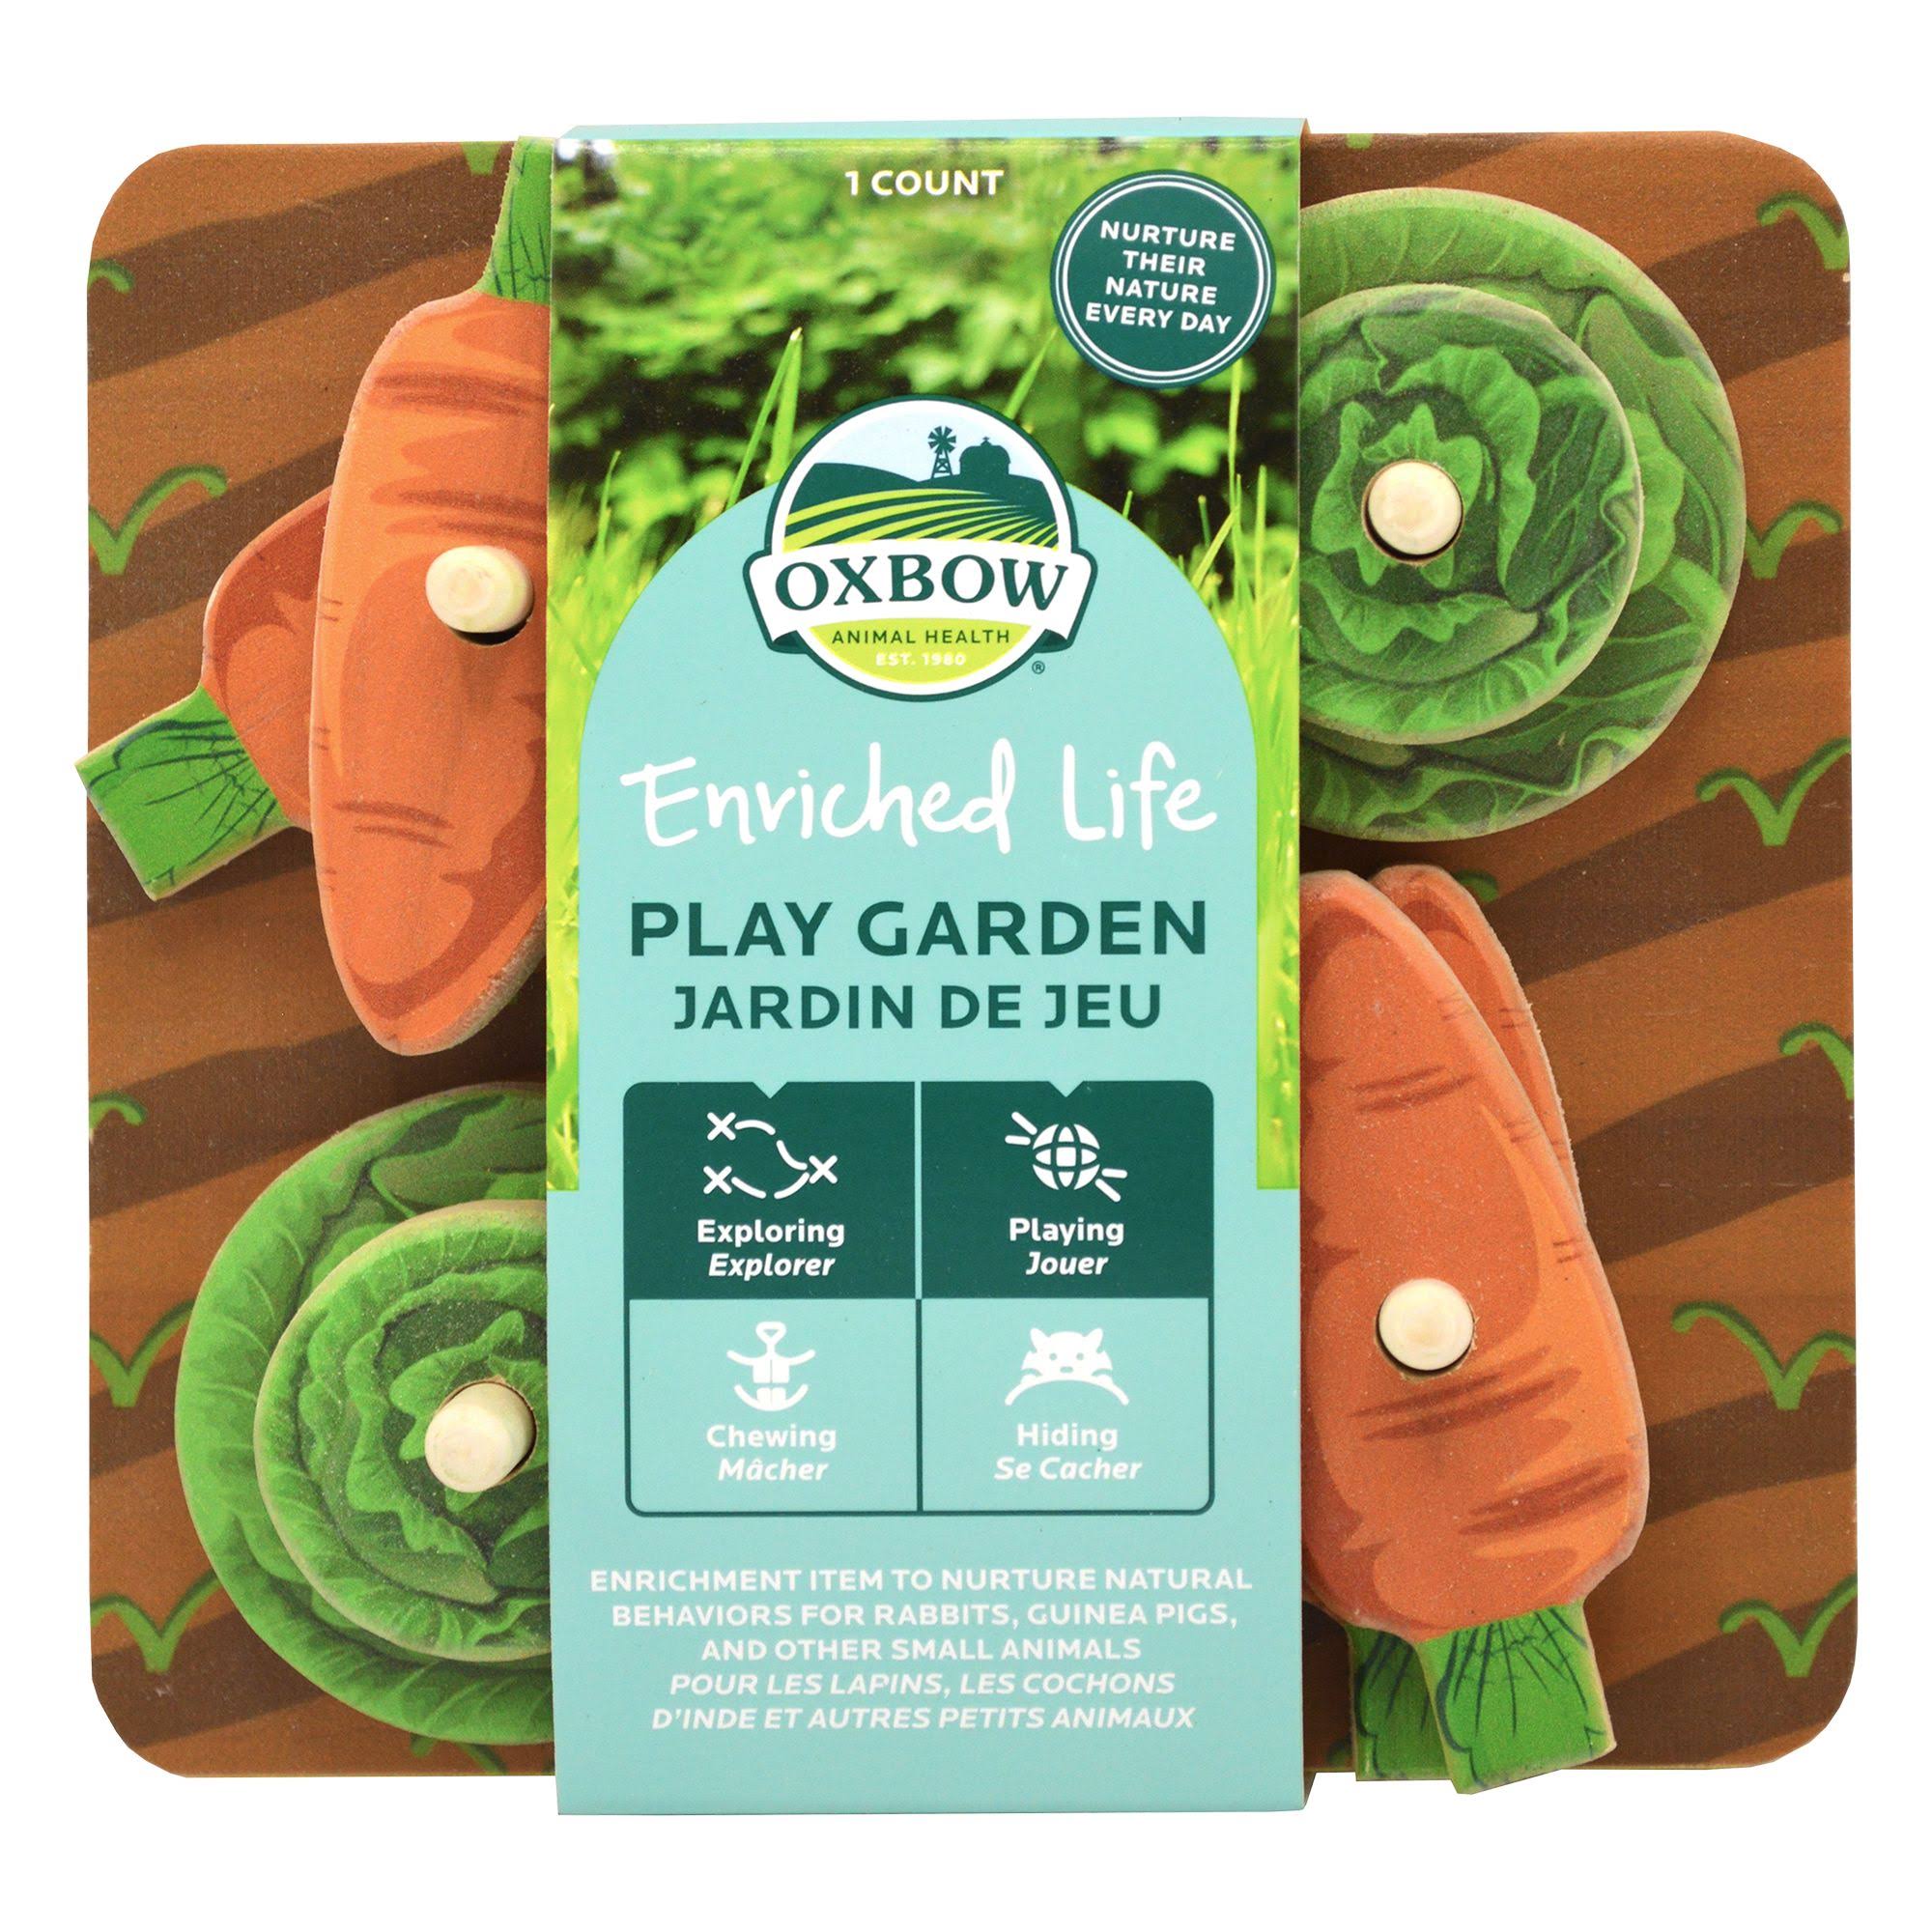 Oxbow Enriched Life - Play Garden